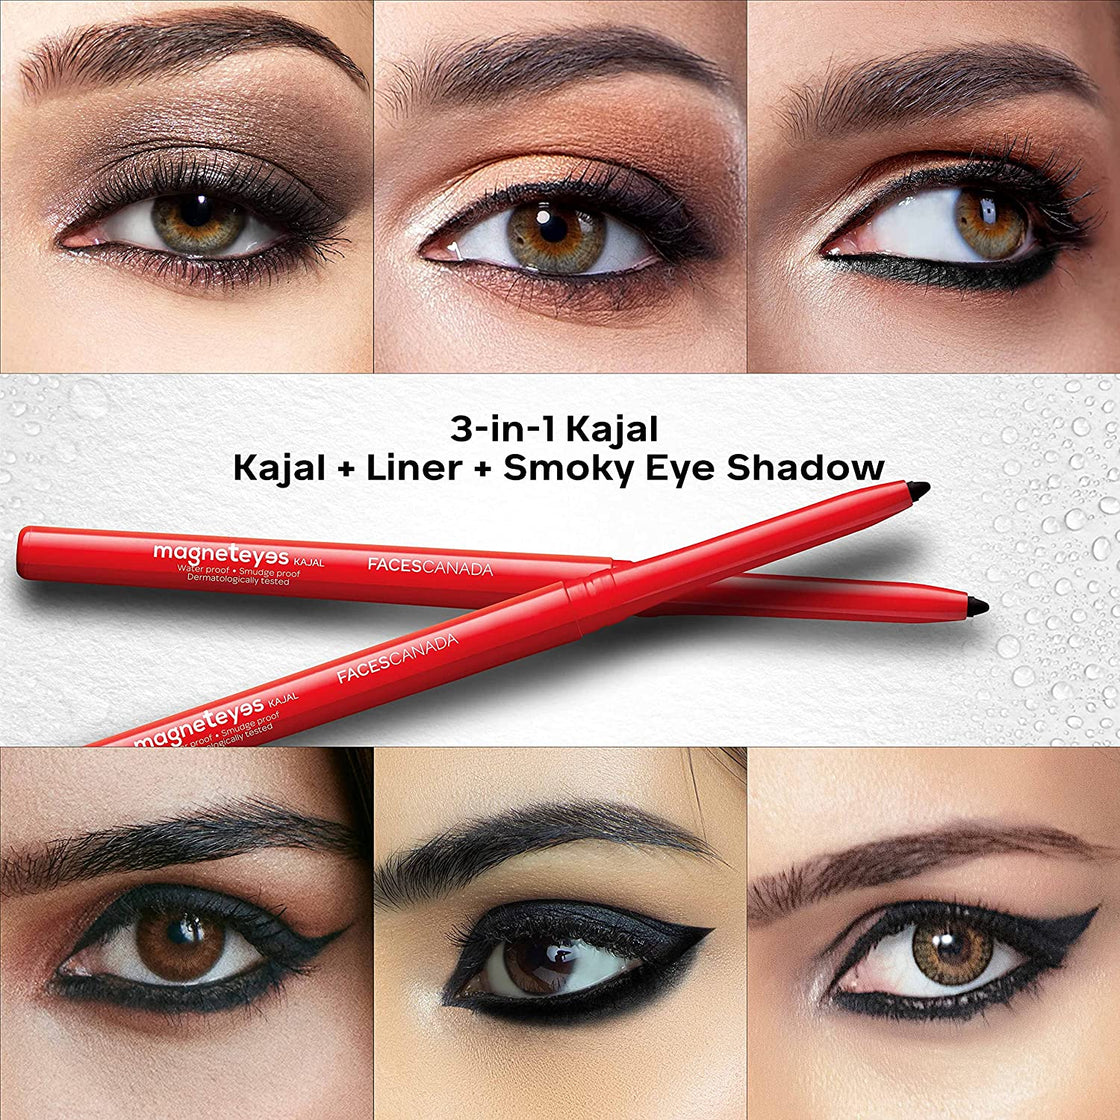 Faces Canada Magneteyes Kajal Duo Pack-5